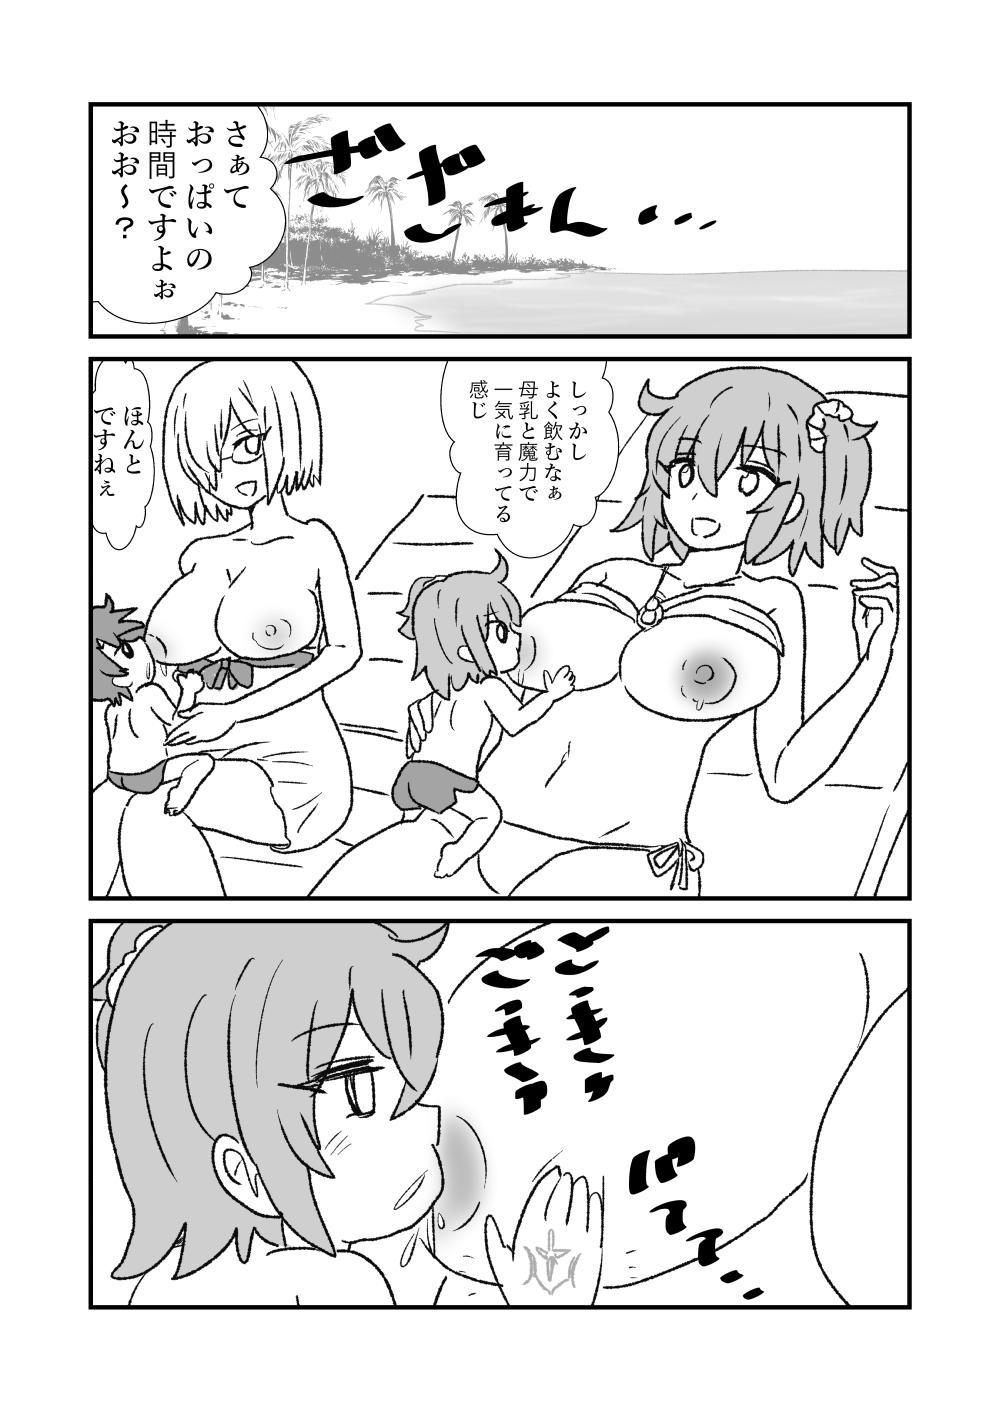 Innocent FPO~桃色林檎の種付け周回～ - Fate grand order Fucking Pussy - Page 65